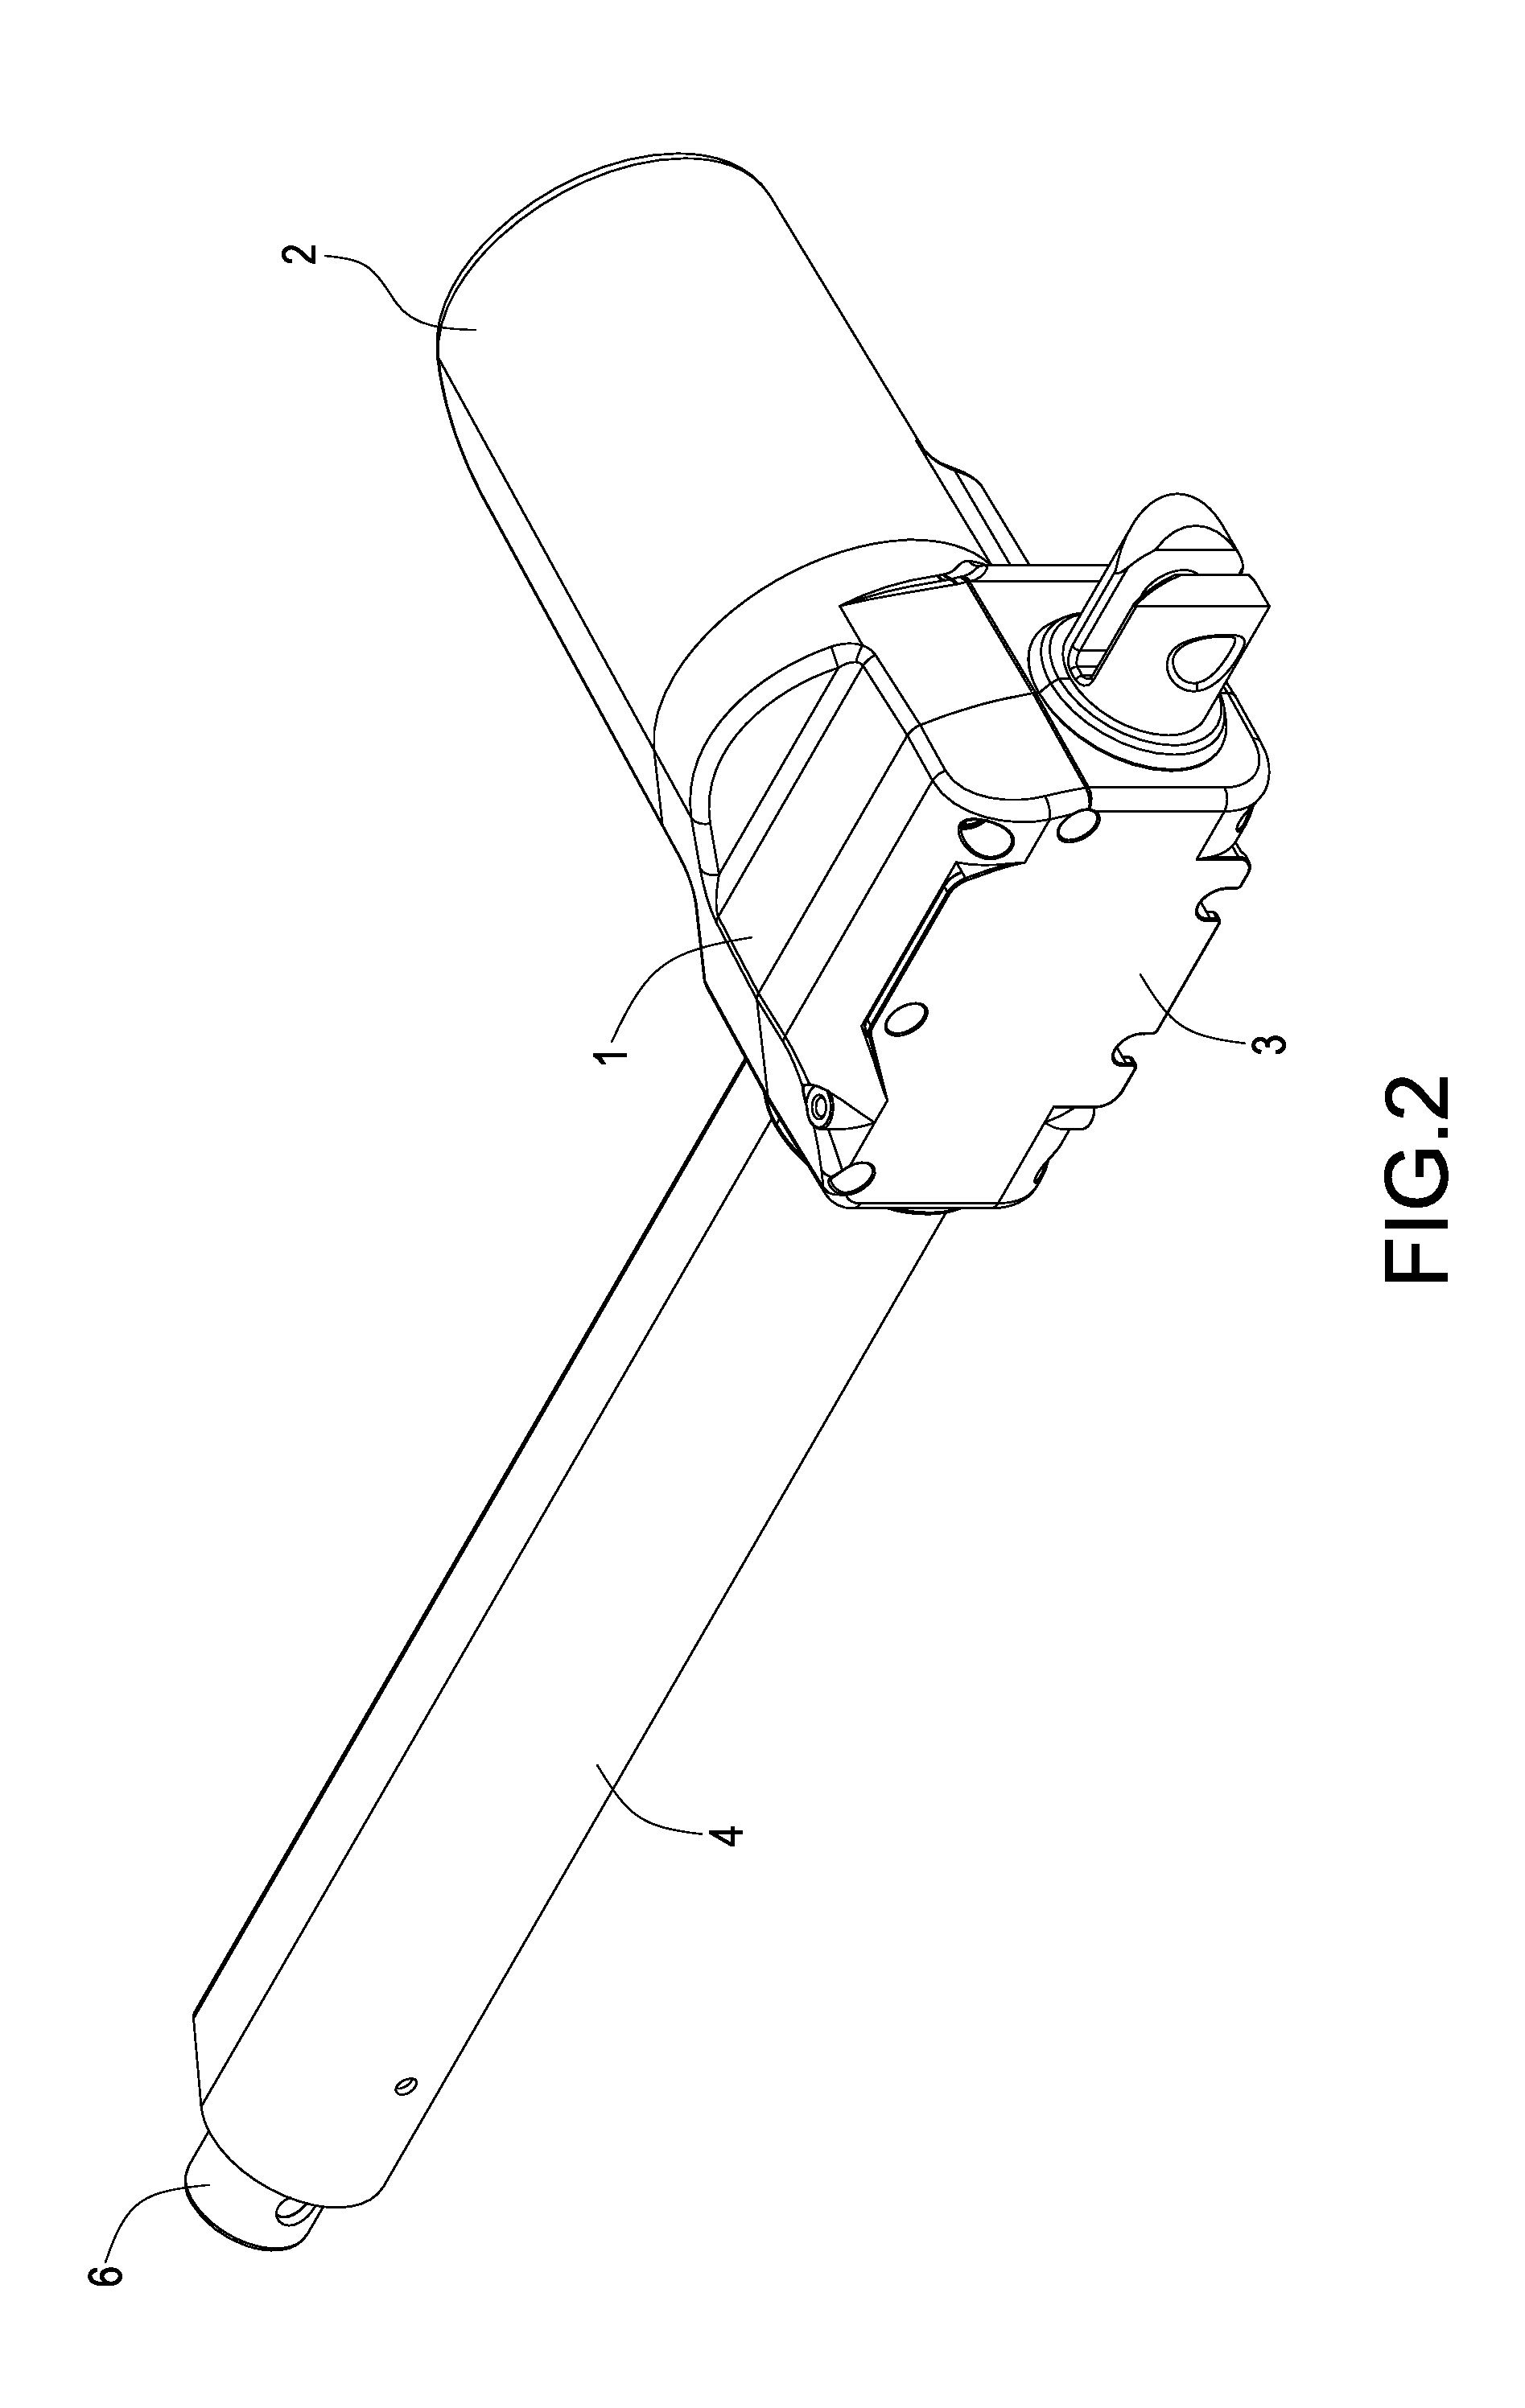 Spindle positioning means of linear actuator